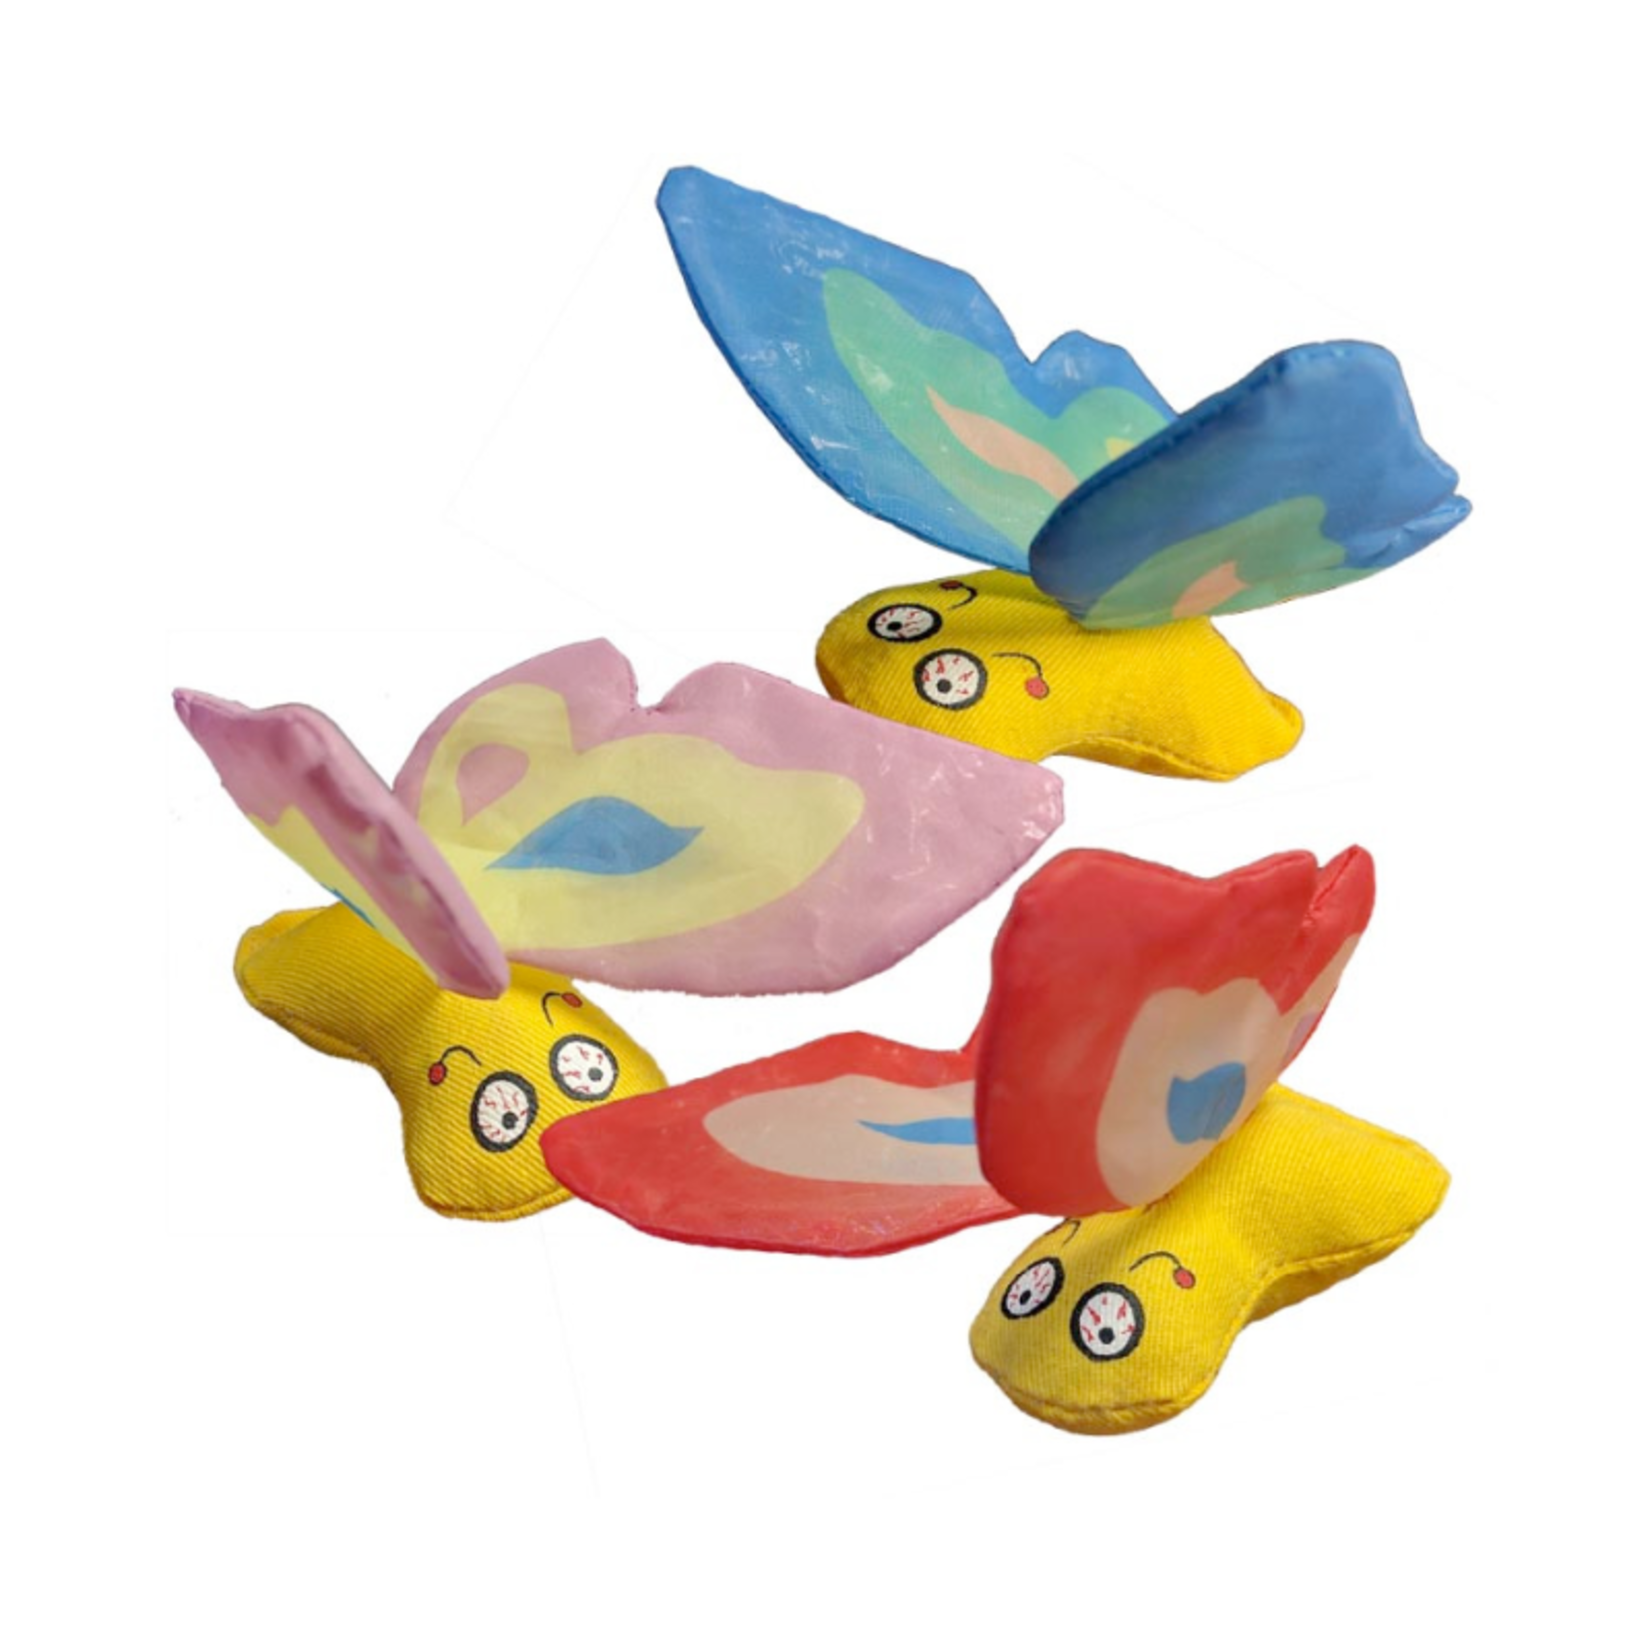 Ducky World Products, Inc. 1 ct. - Butterfly - Catnip Toy - Ducky World - Yeowww!